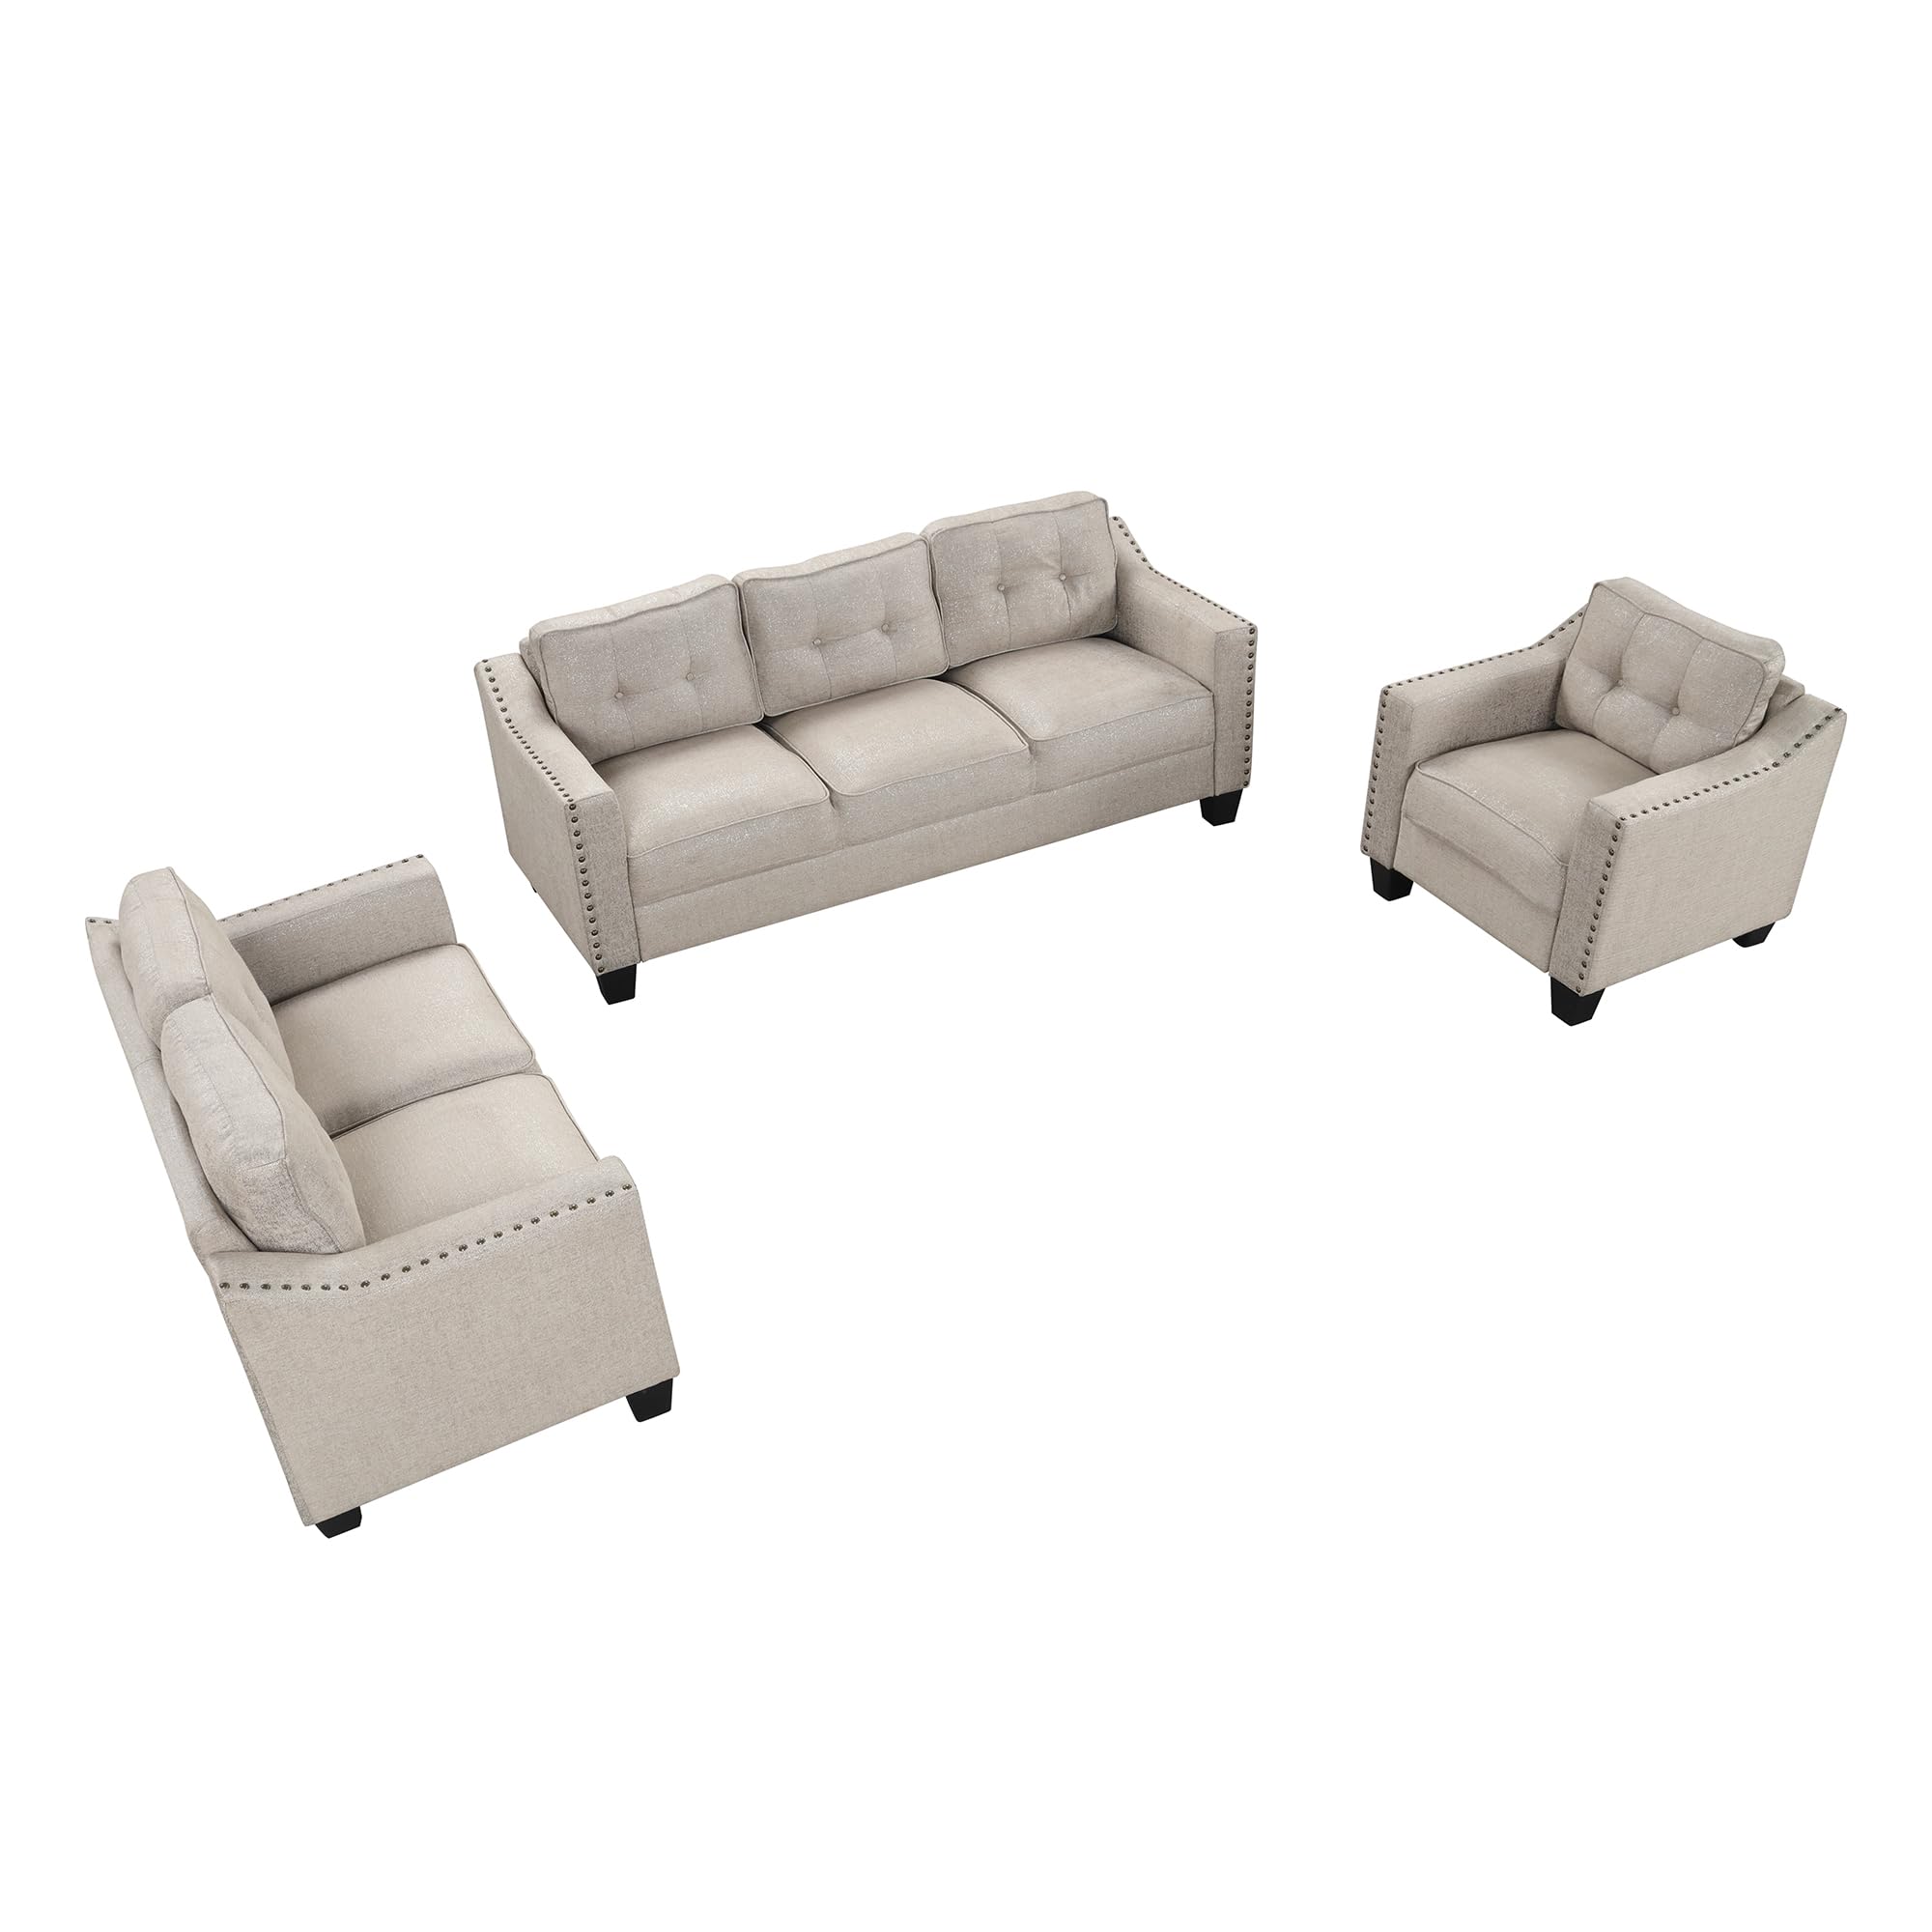 UBGO Living Room Furniture Piece Sets Including Three, Loveseat and Single Chair,Linen Upholstered Sofas & Couches,Beige (1+2+3 Seat)